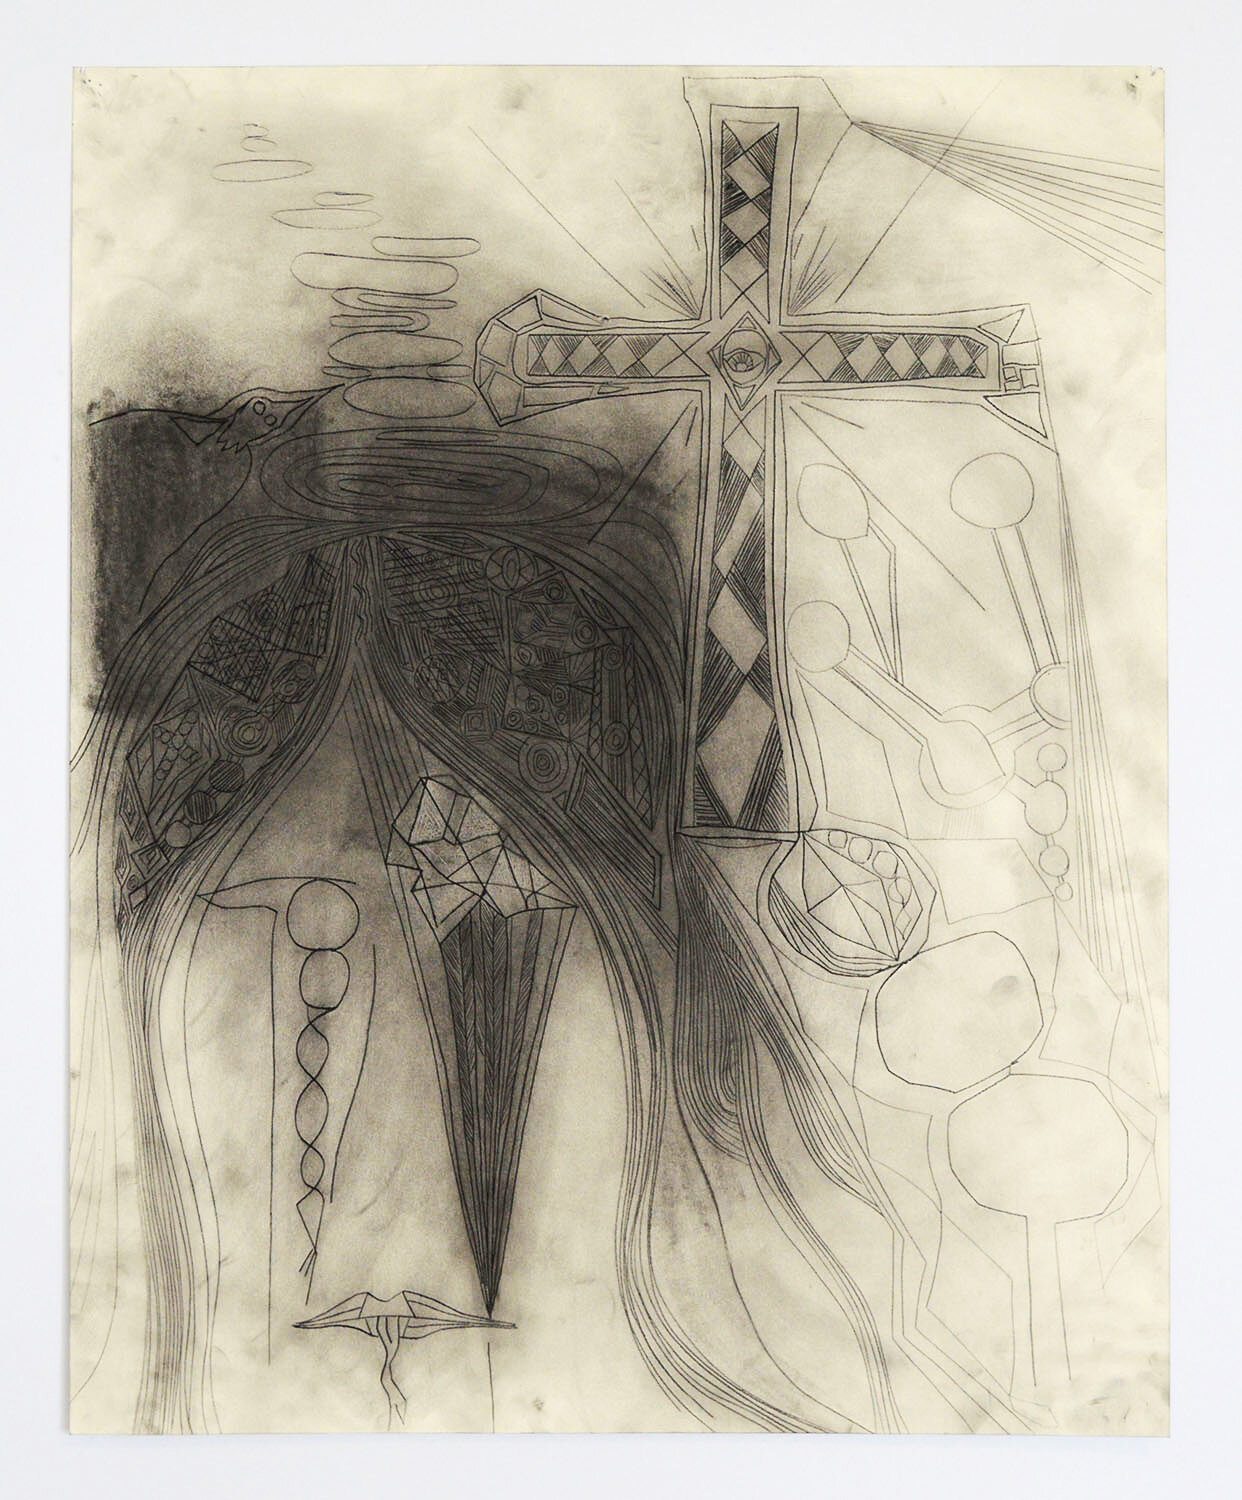 Untitled, 2016 - Charcoal, dust on etched paper - 30 x 25 inches